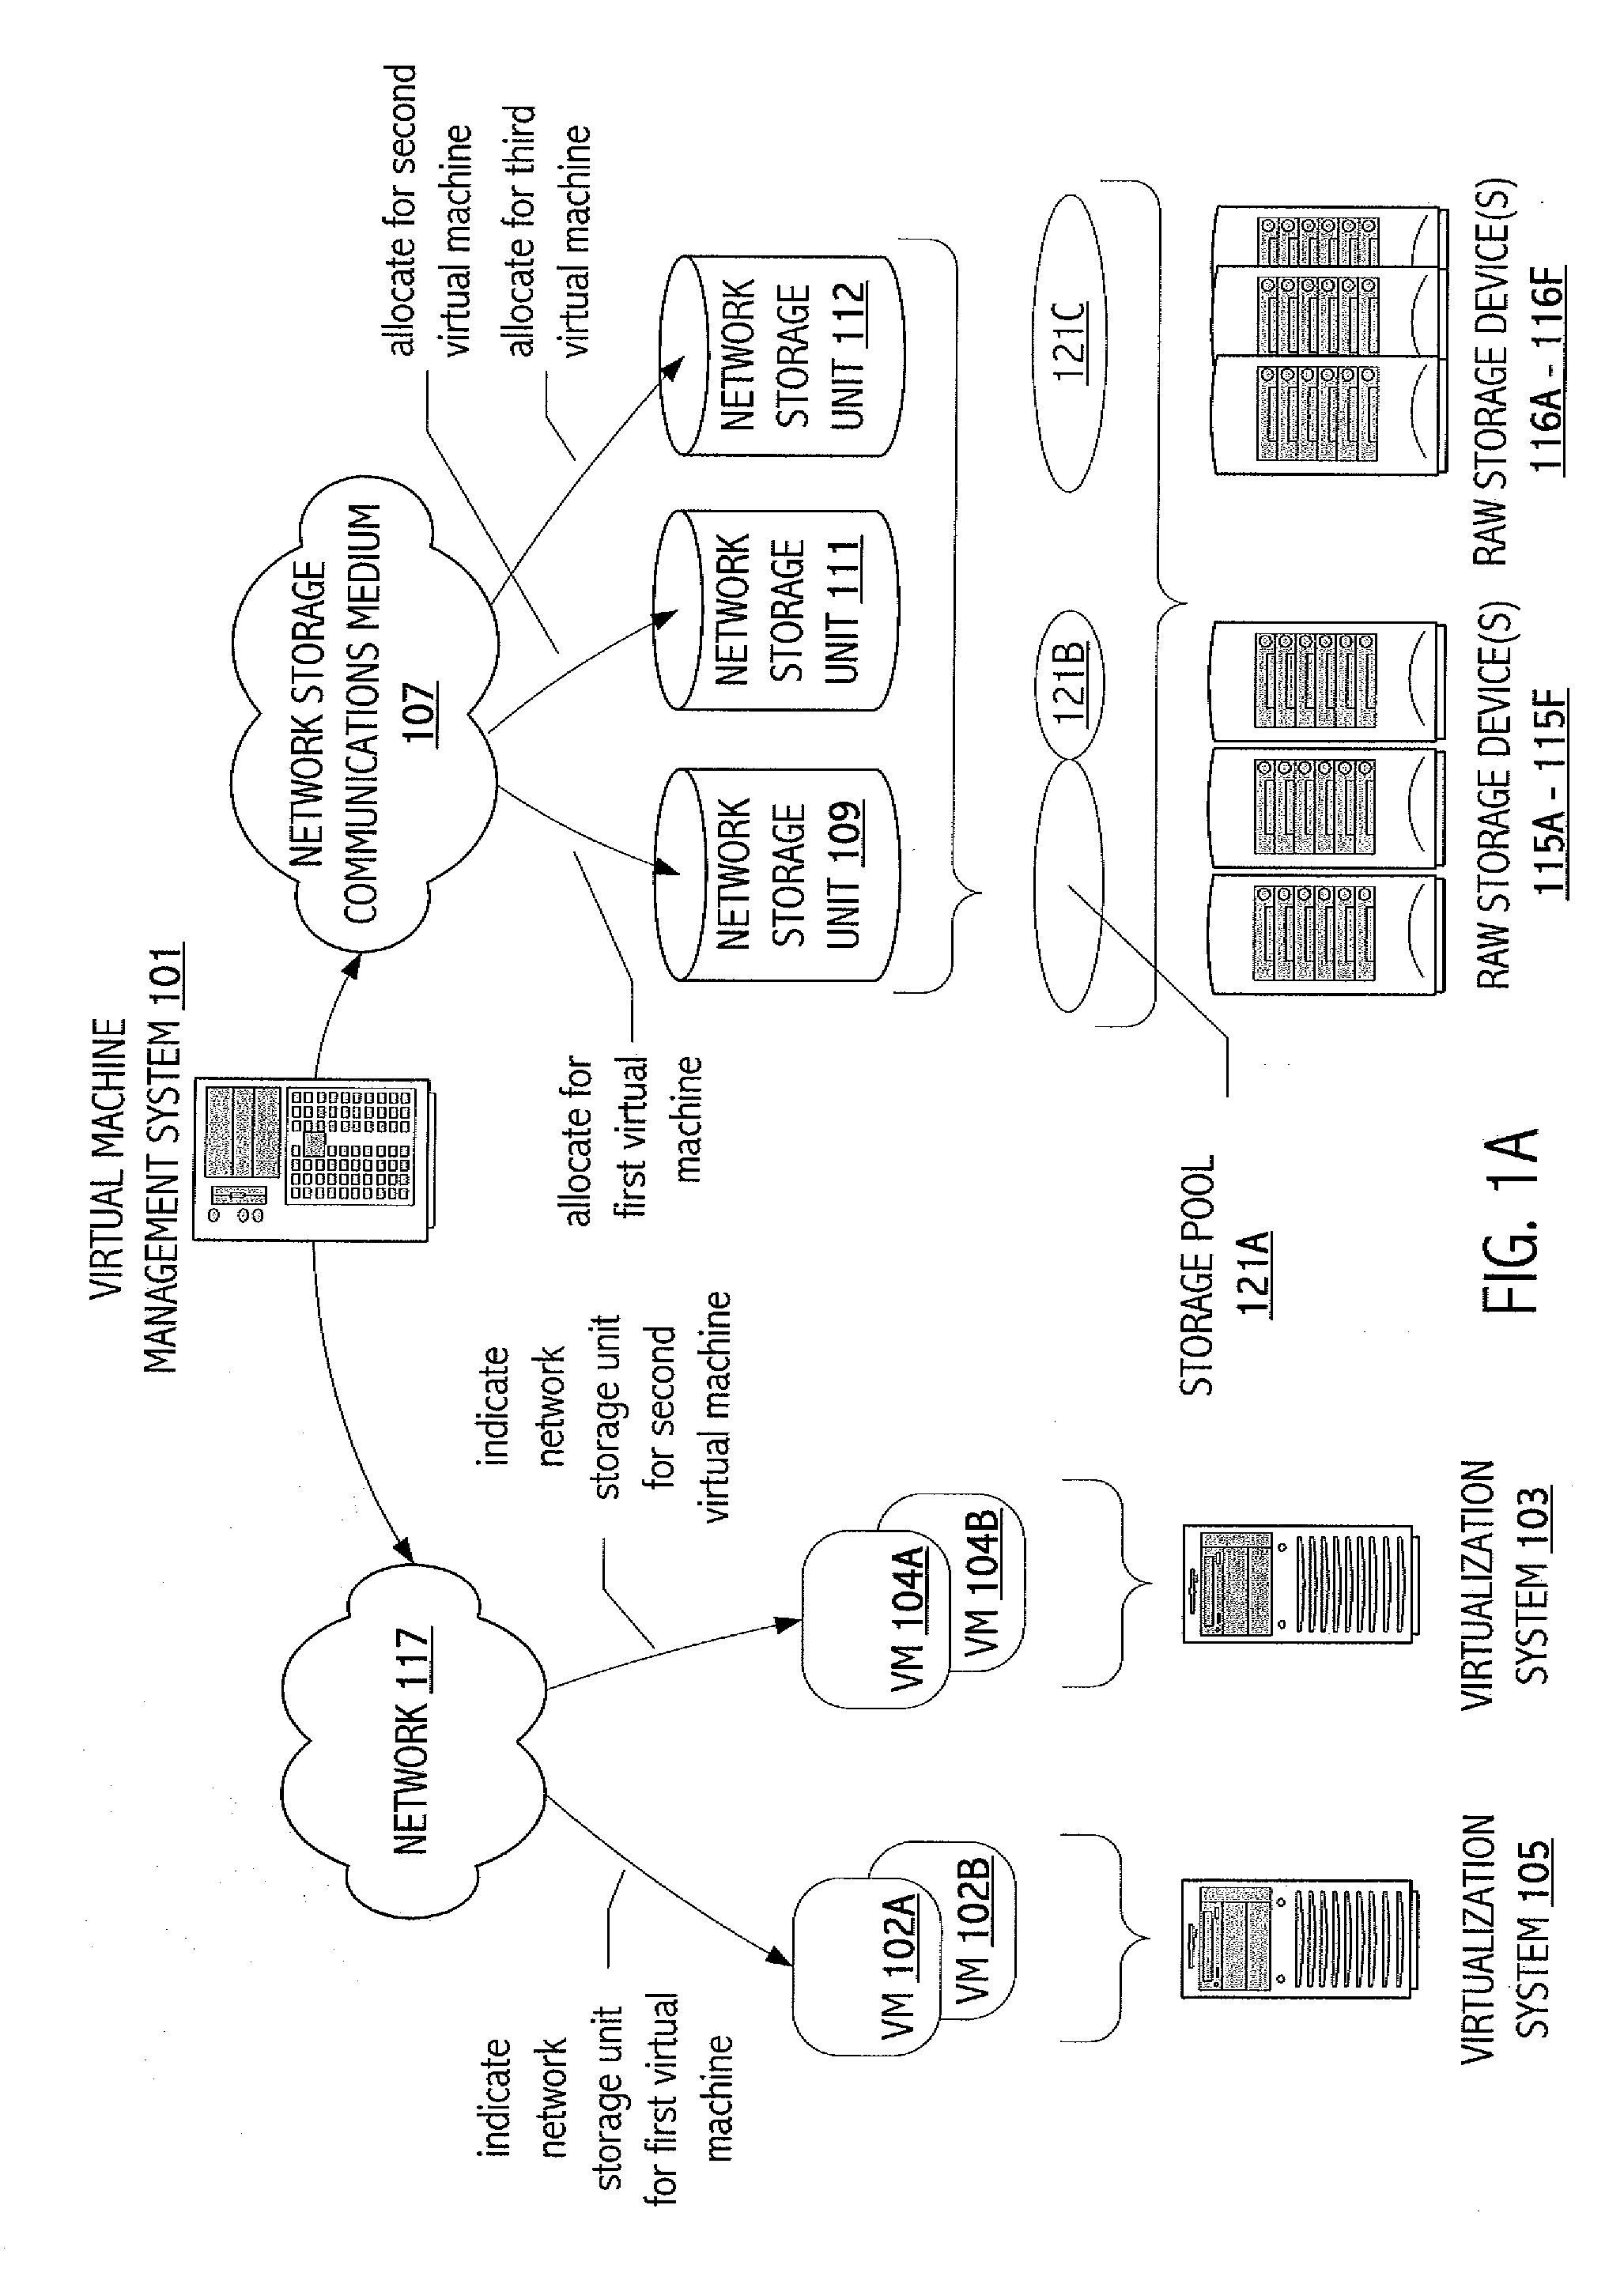 Implementation of Virtual Machine Operations Using Storage System Functionality